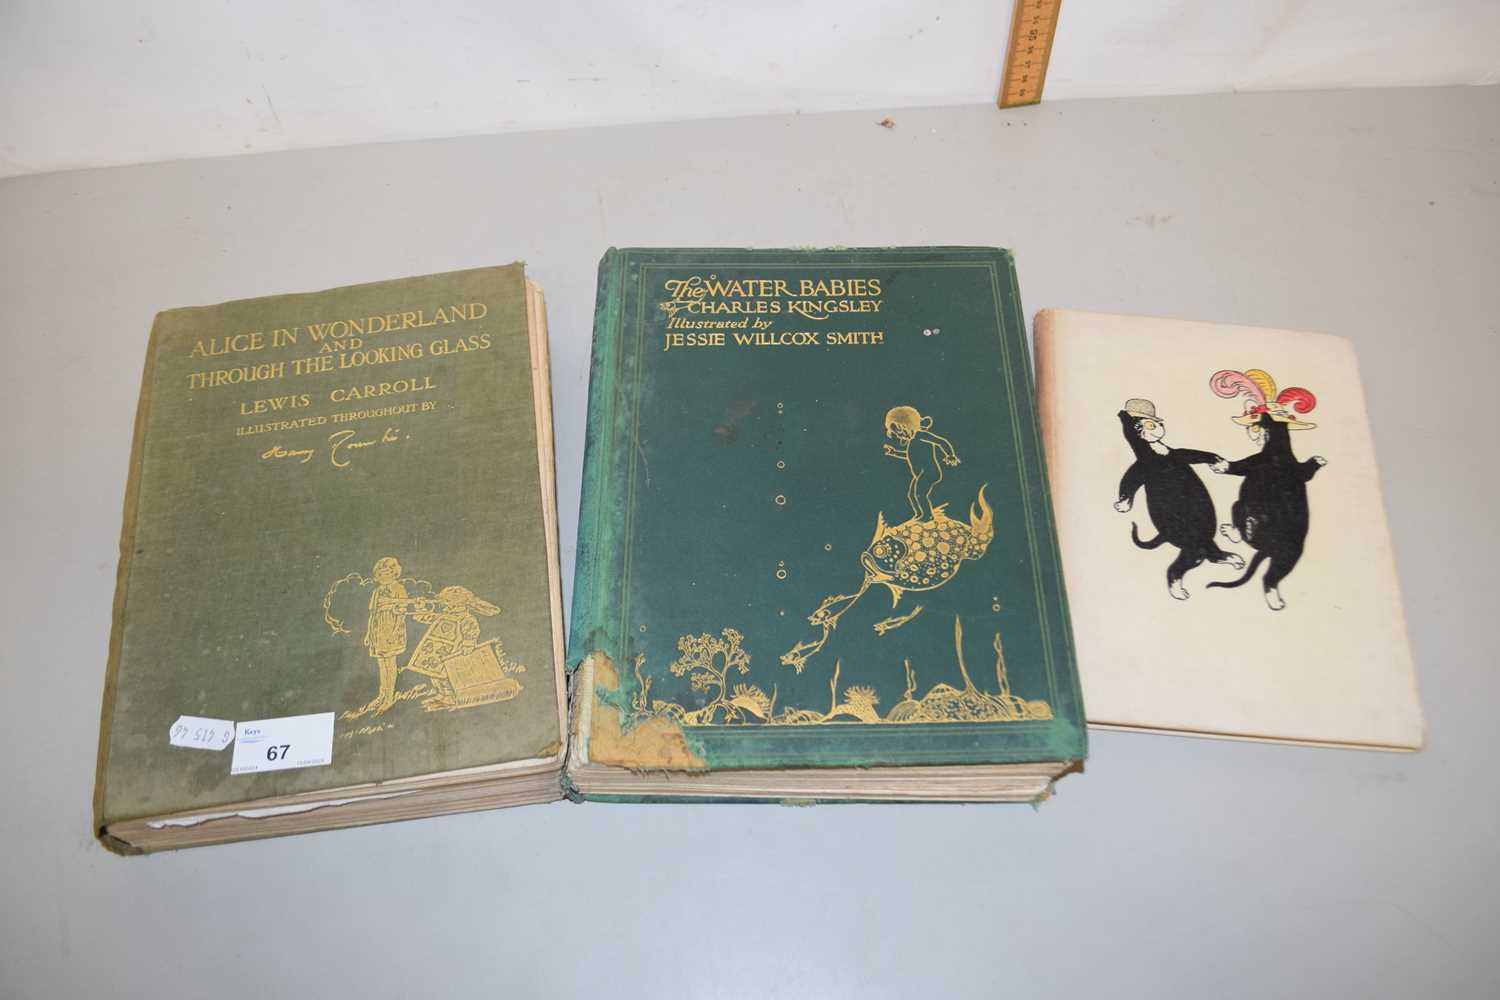 Lewis Carroll, Alice in Wonderland and Through the Looking Glass together with Charles Kingsley